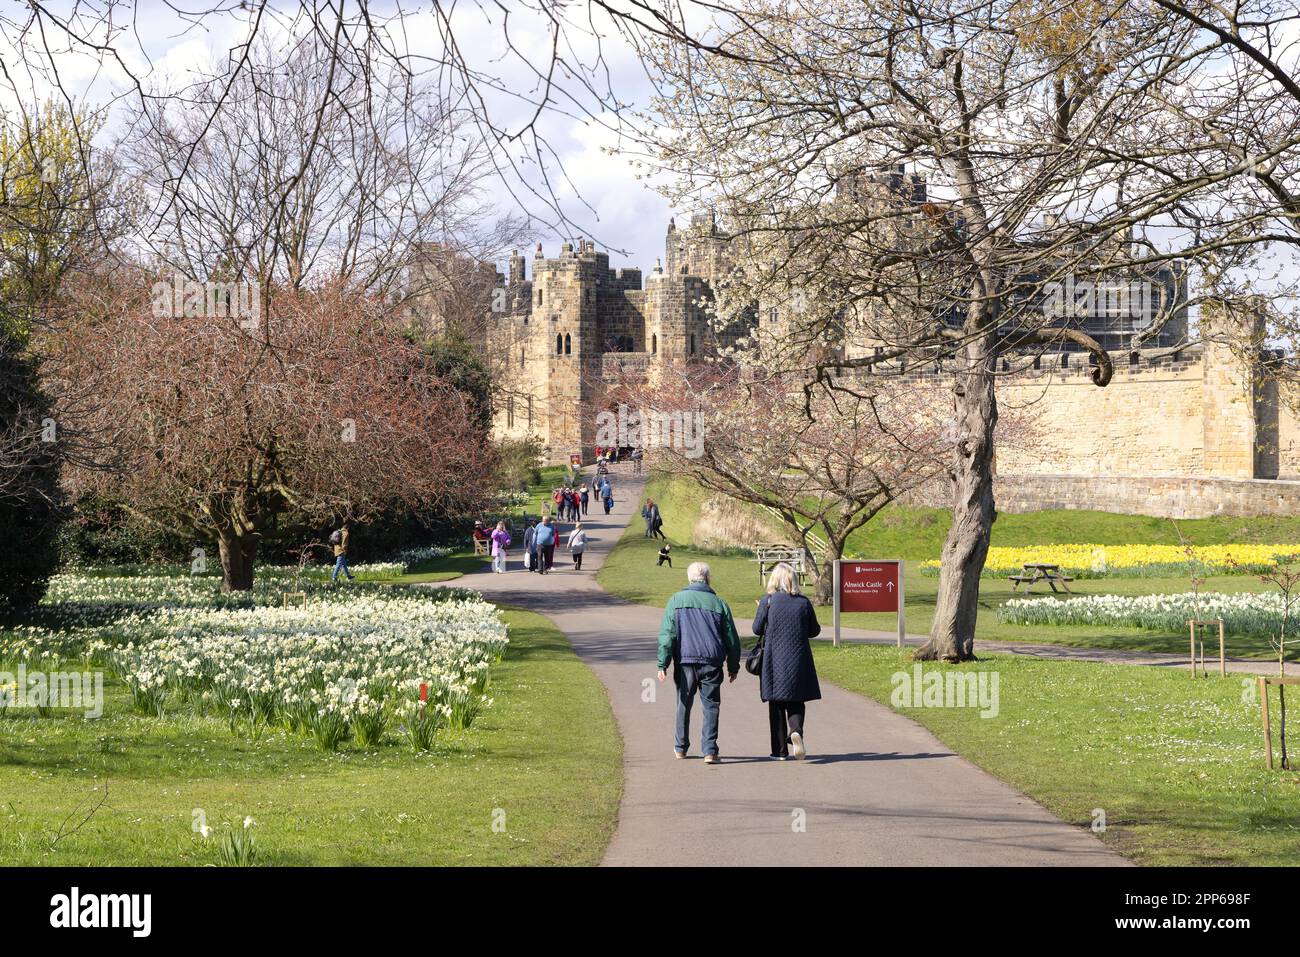 Alnwick Castle Northumberland; A large medieval 12th century castle. Visitors in the castle gardens on a sunny spring day; Alnwick Northumberland UK Stock Photo